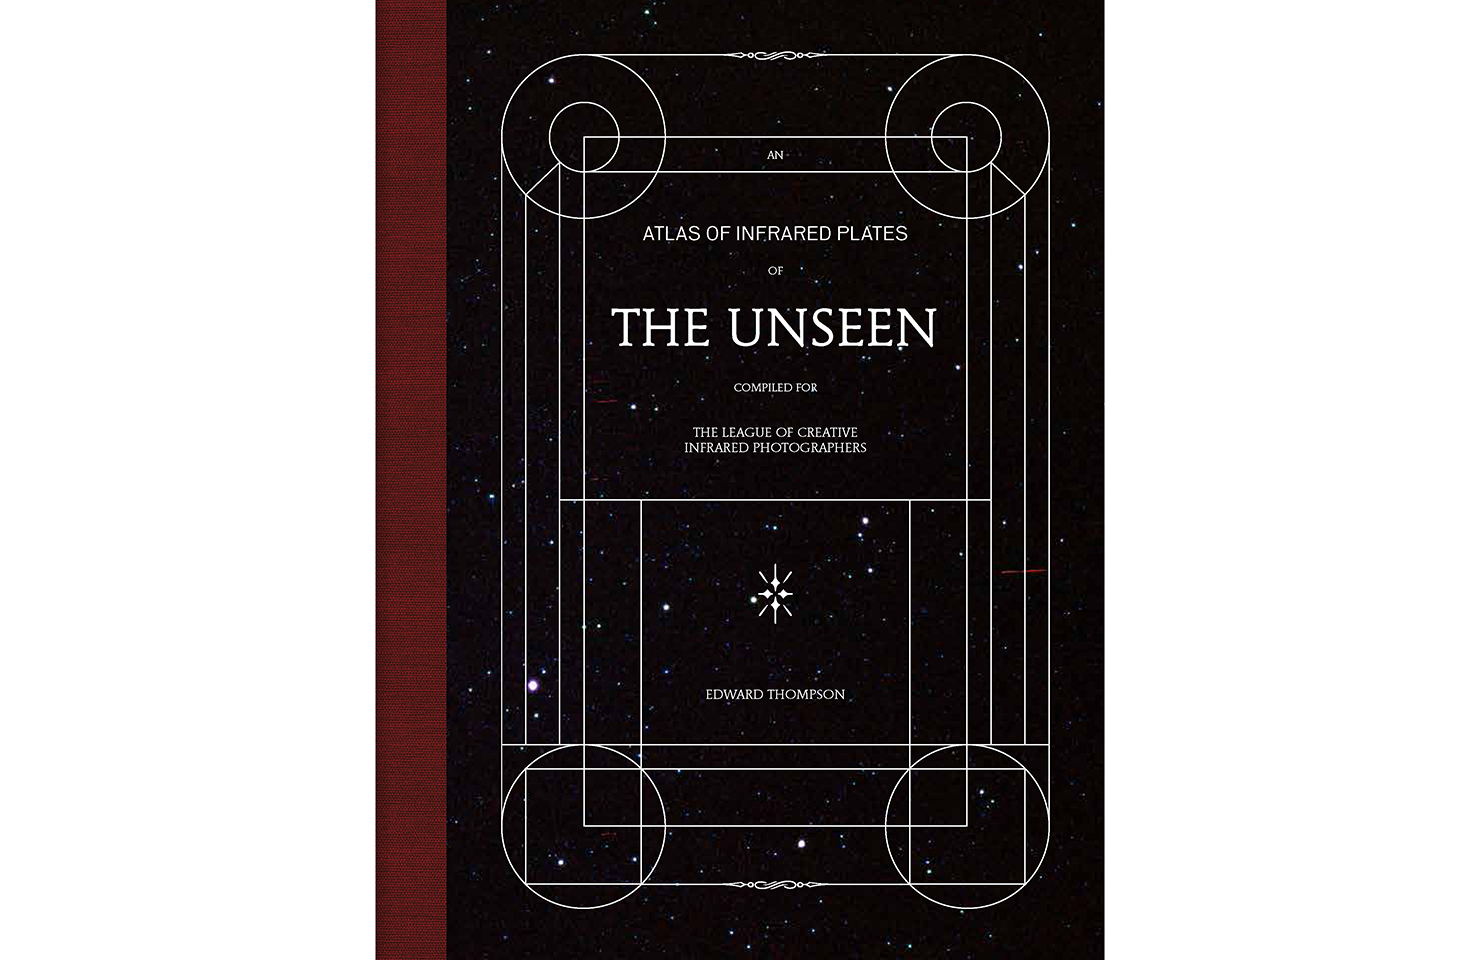 The Unseen - An Atlas of Infrared Plates